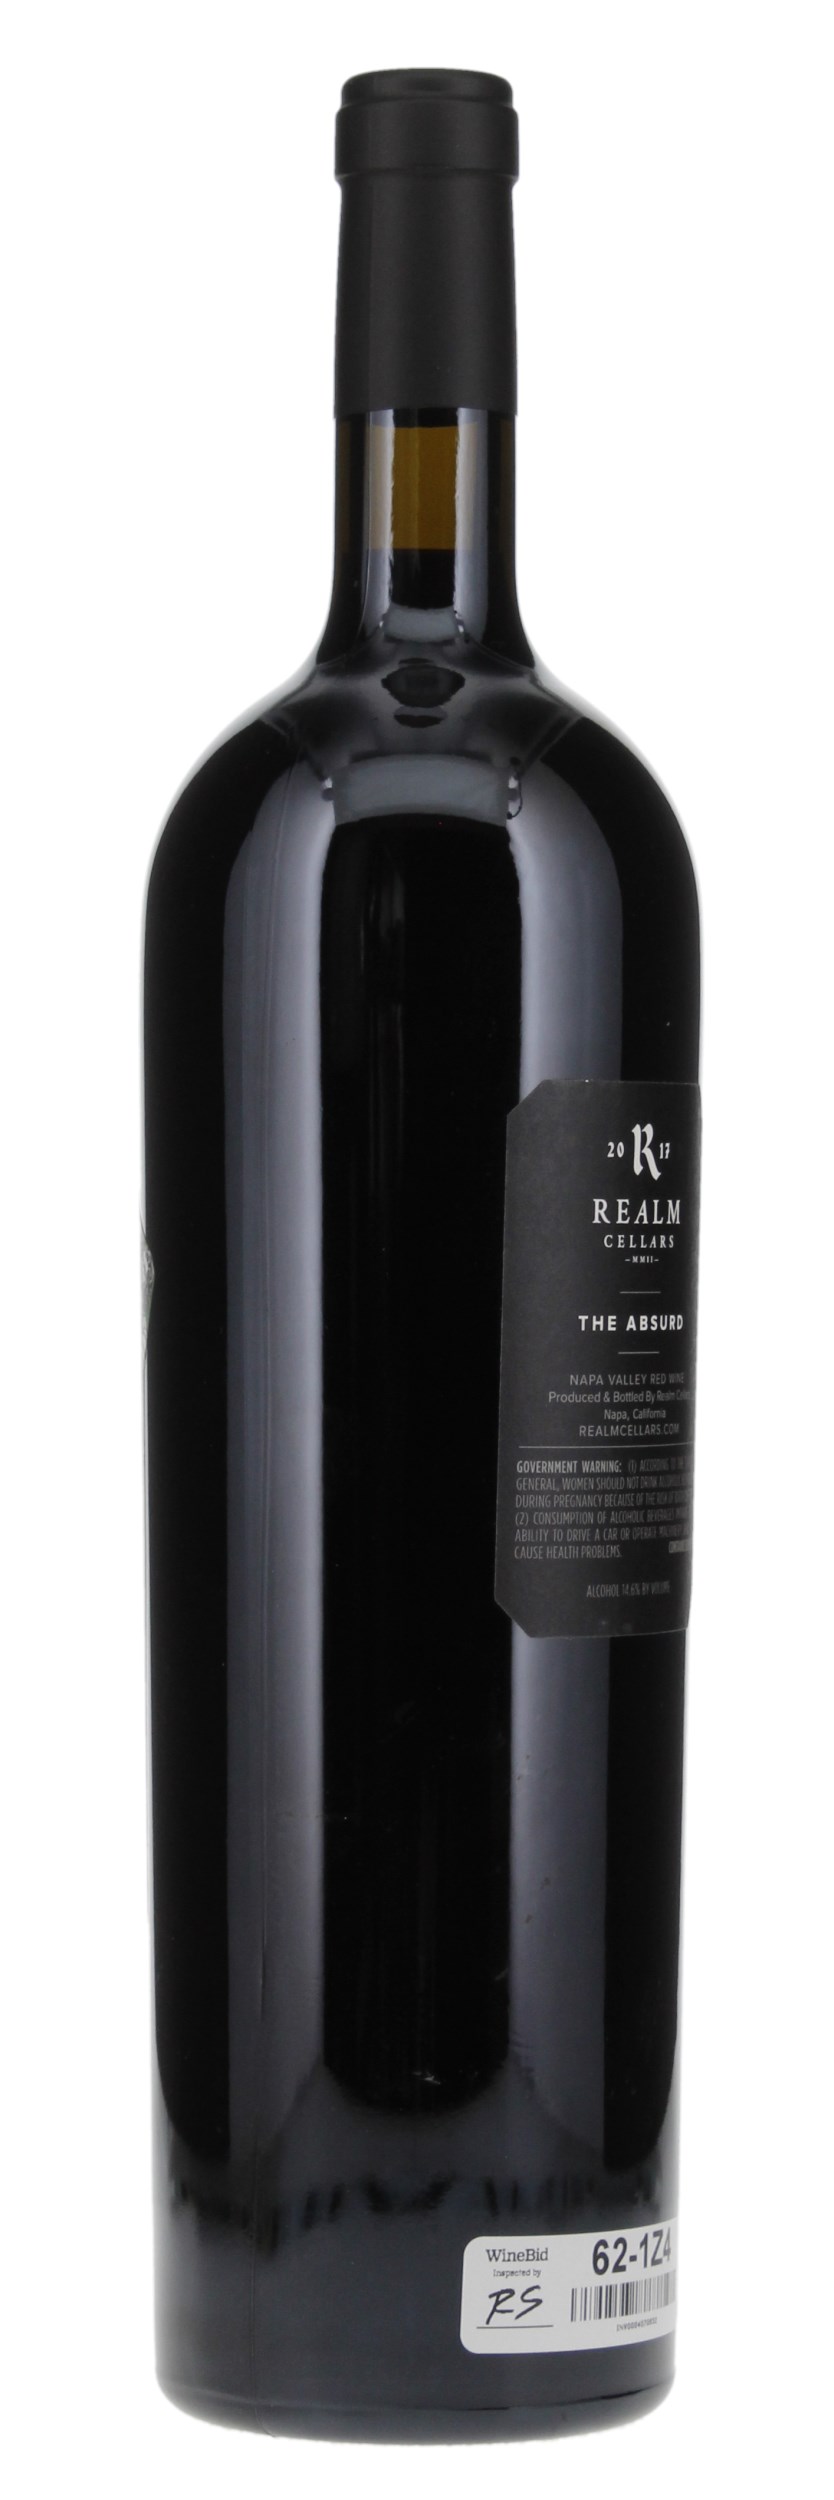 2017 Realm The Absurd, 1.5ltr